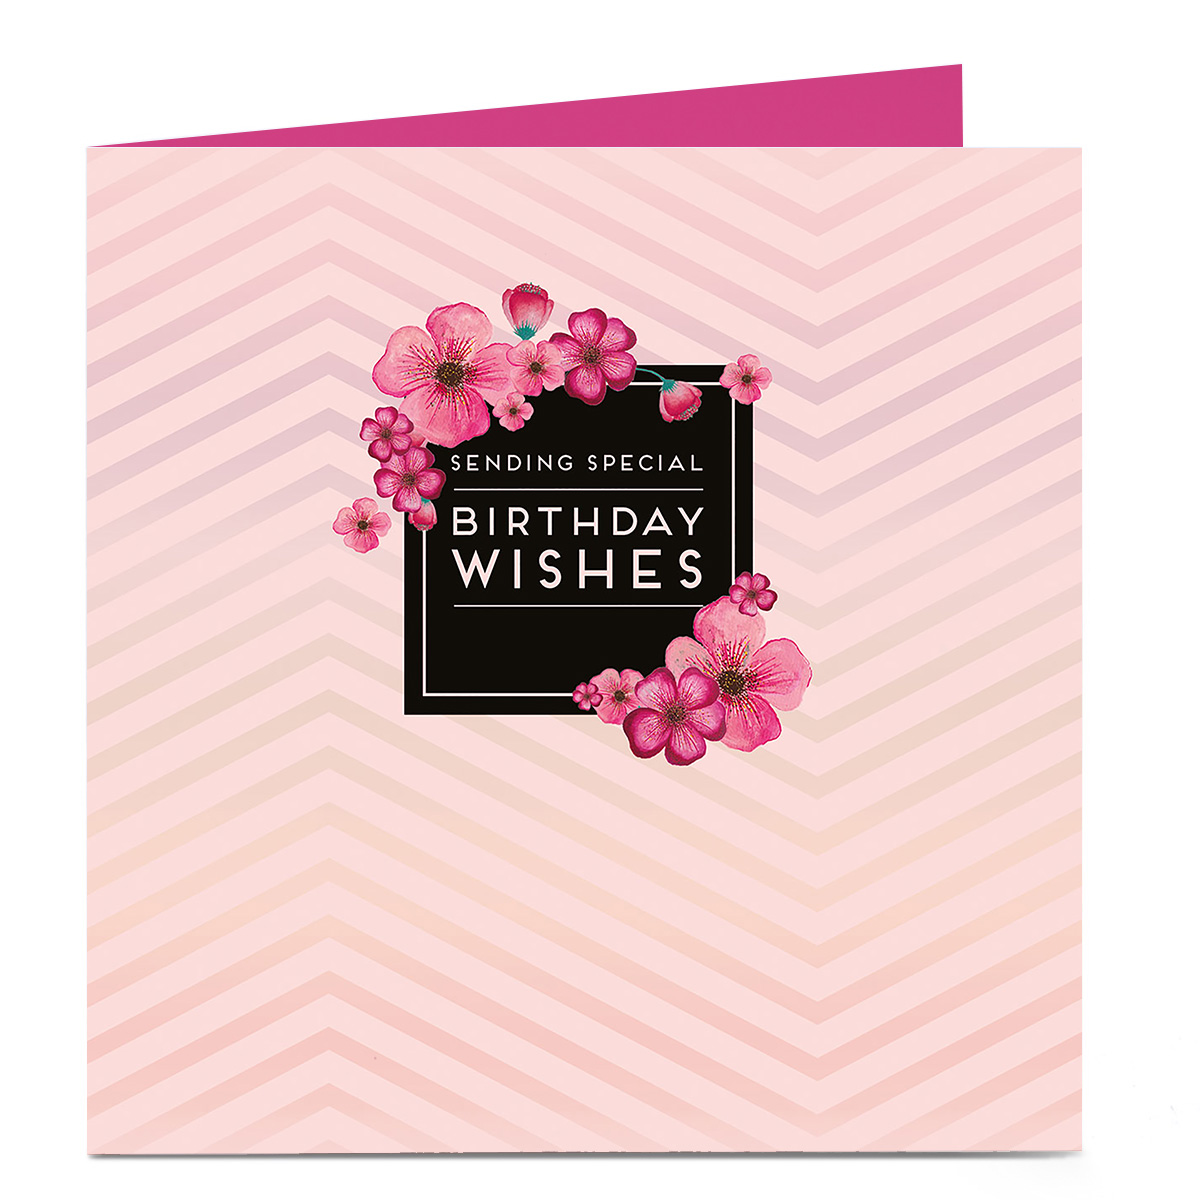 Personalised Bright Ideas Card - Sending Special Wishes